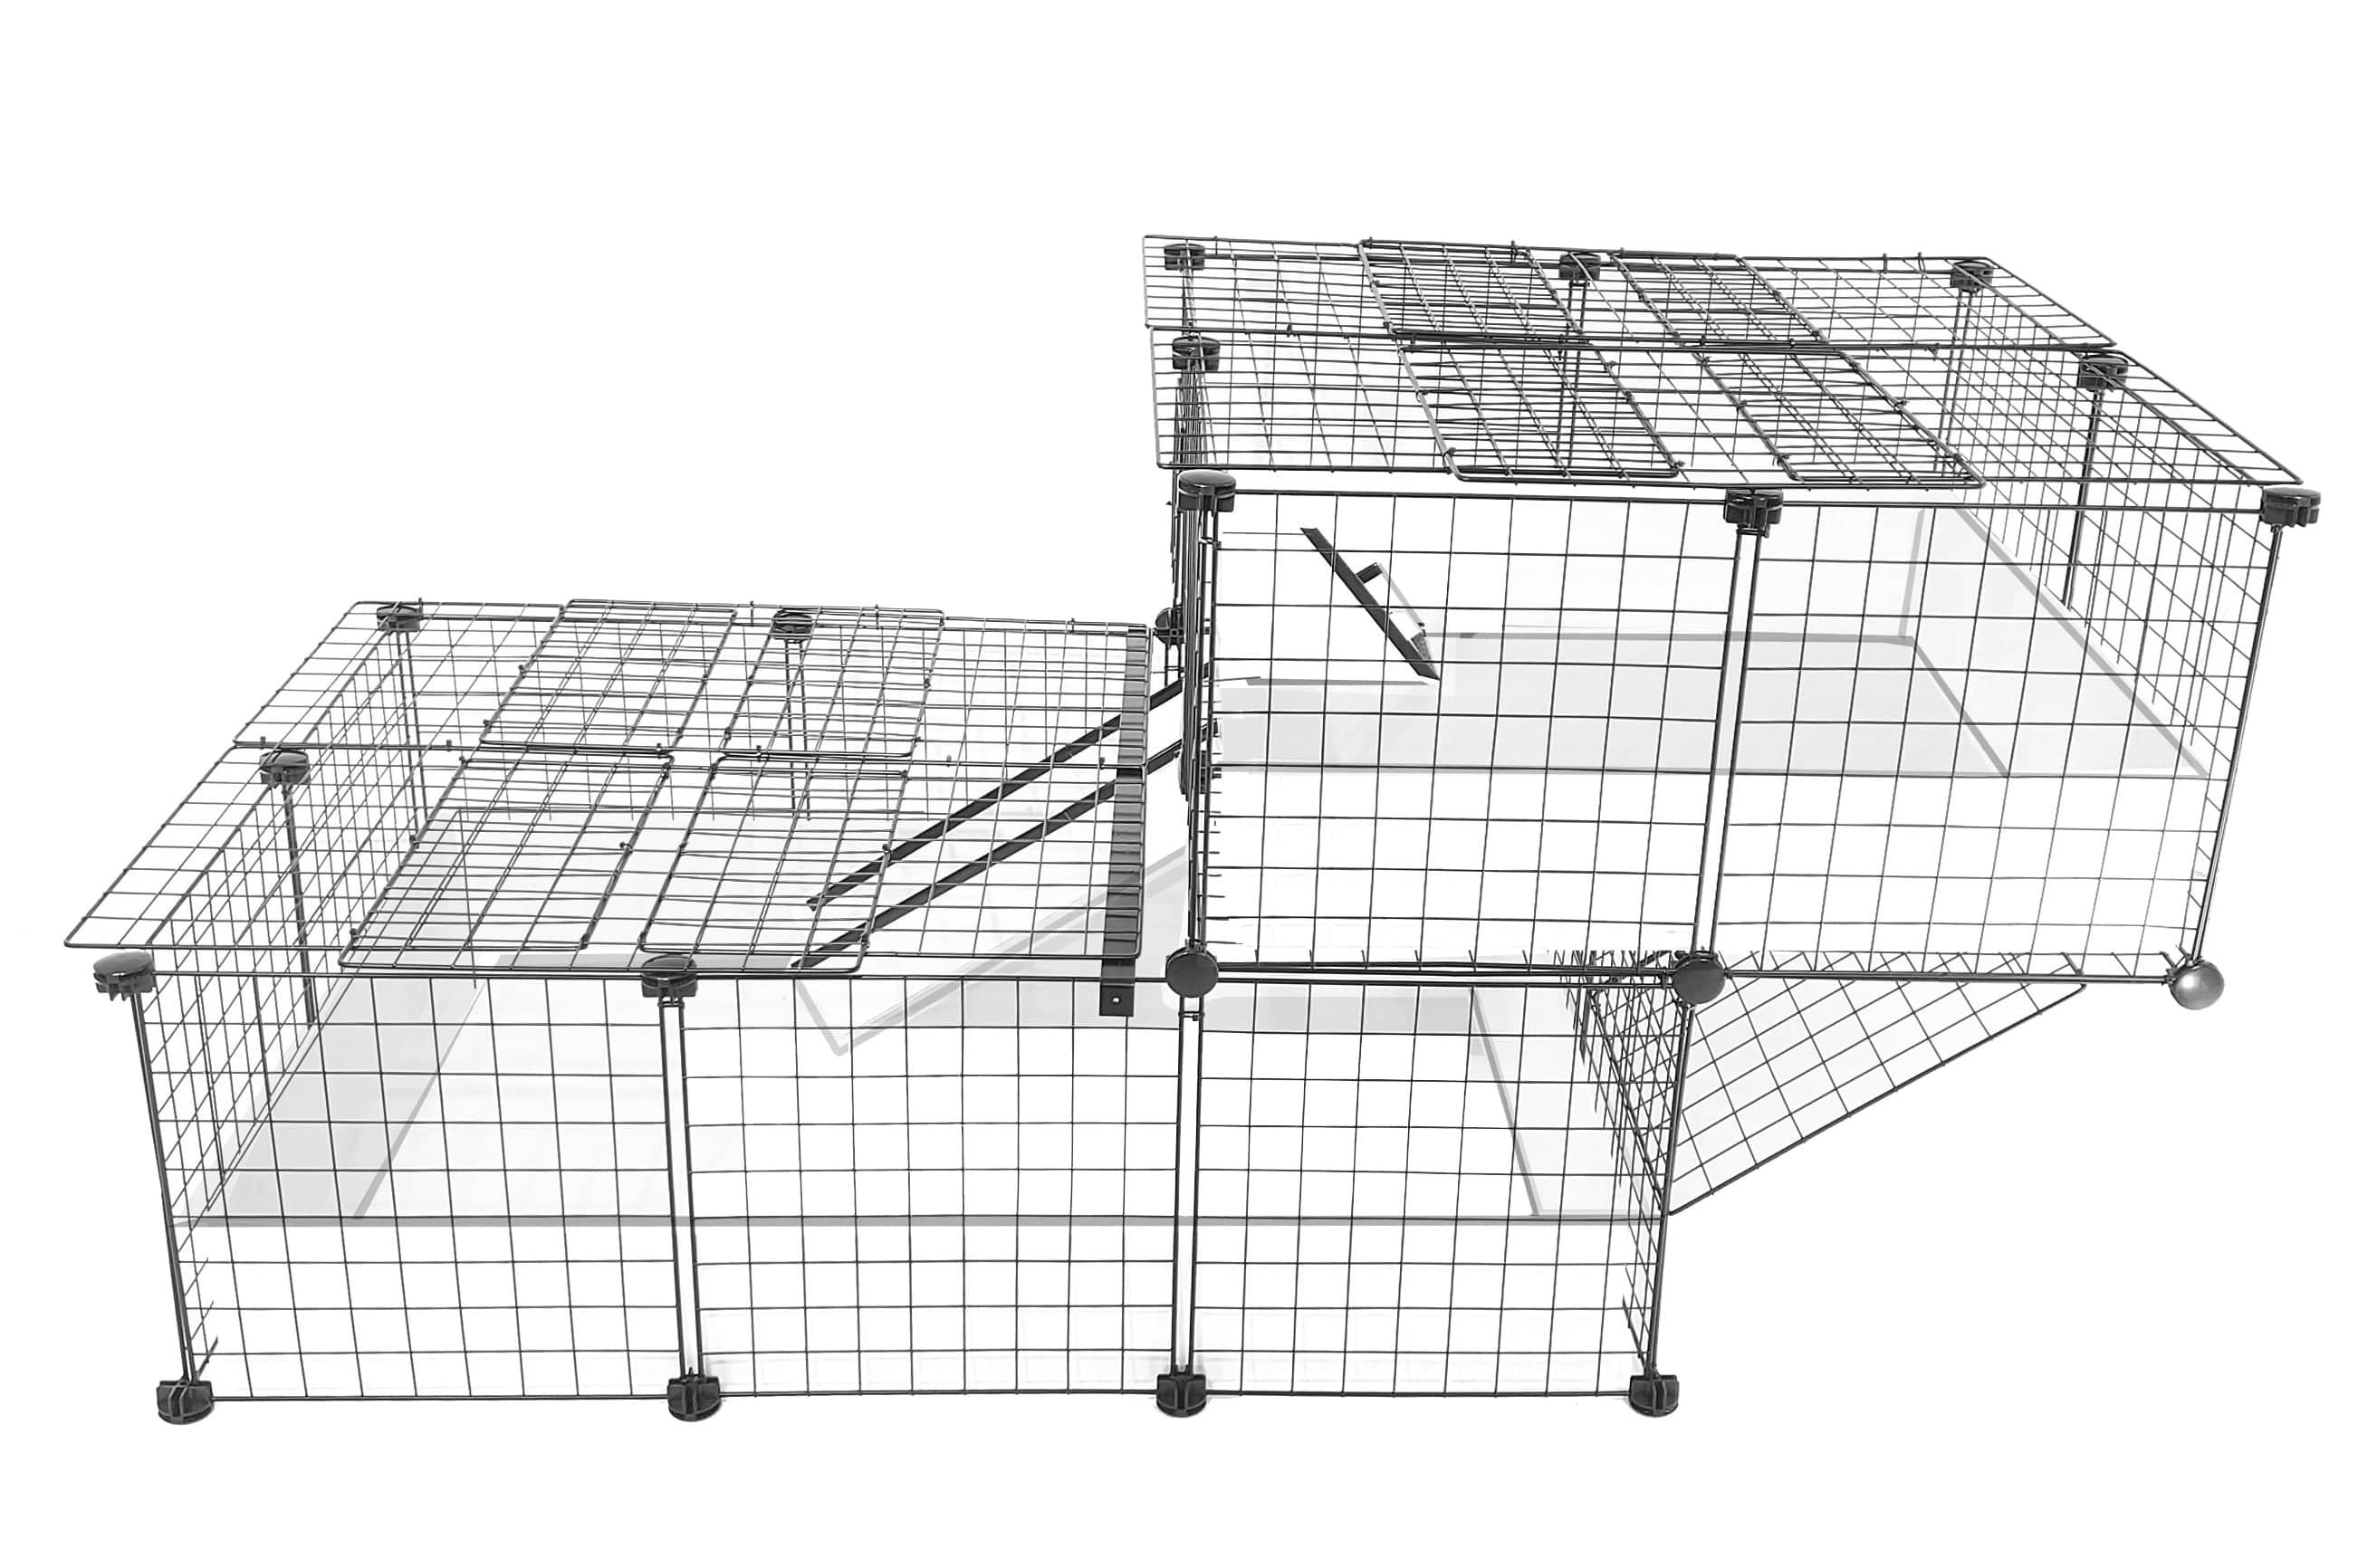 Covered white c&c guinea pig cage with an offset wide loft and black grids